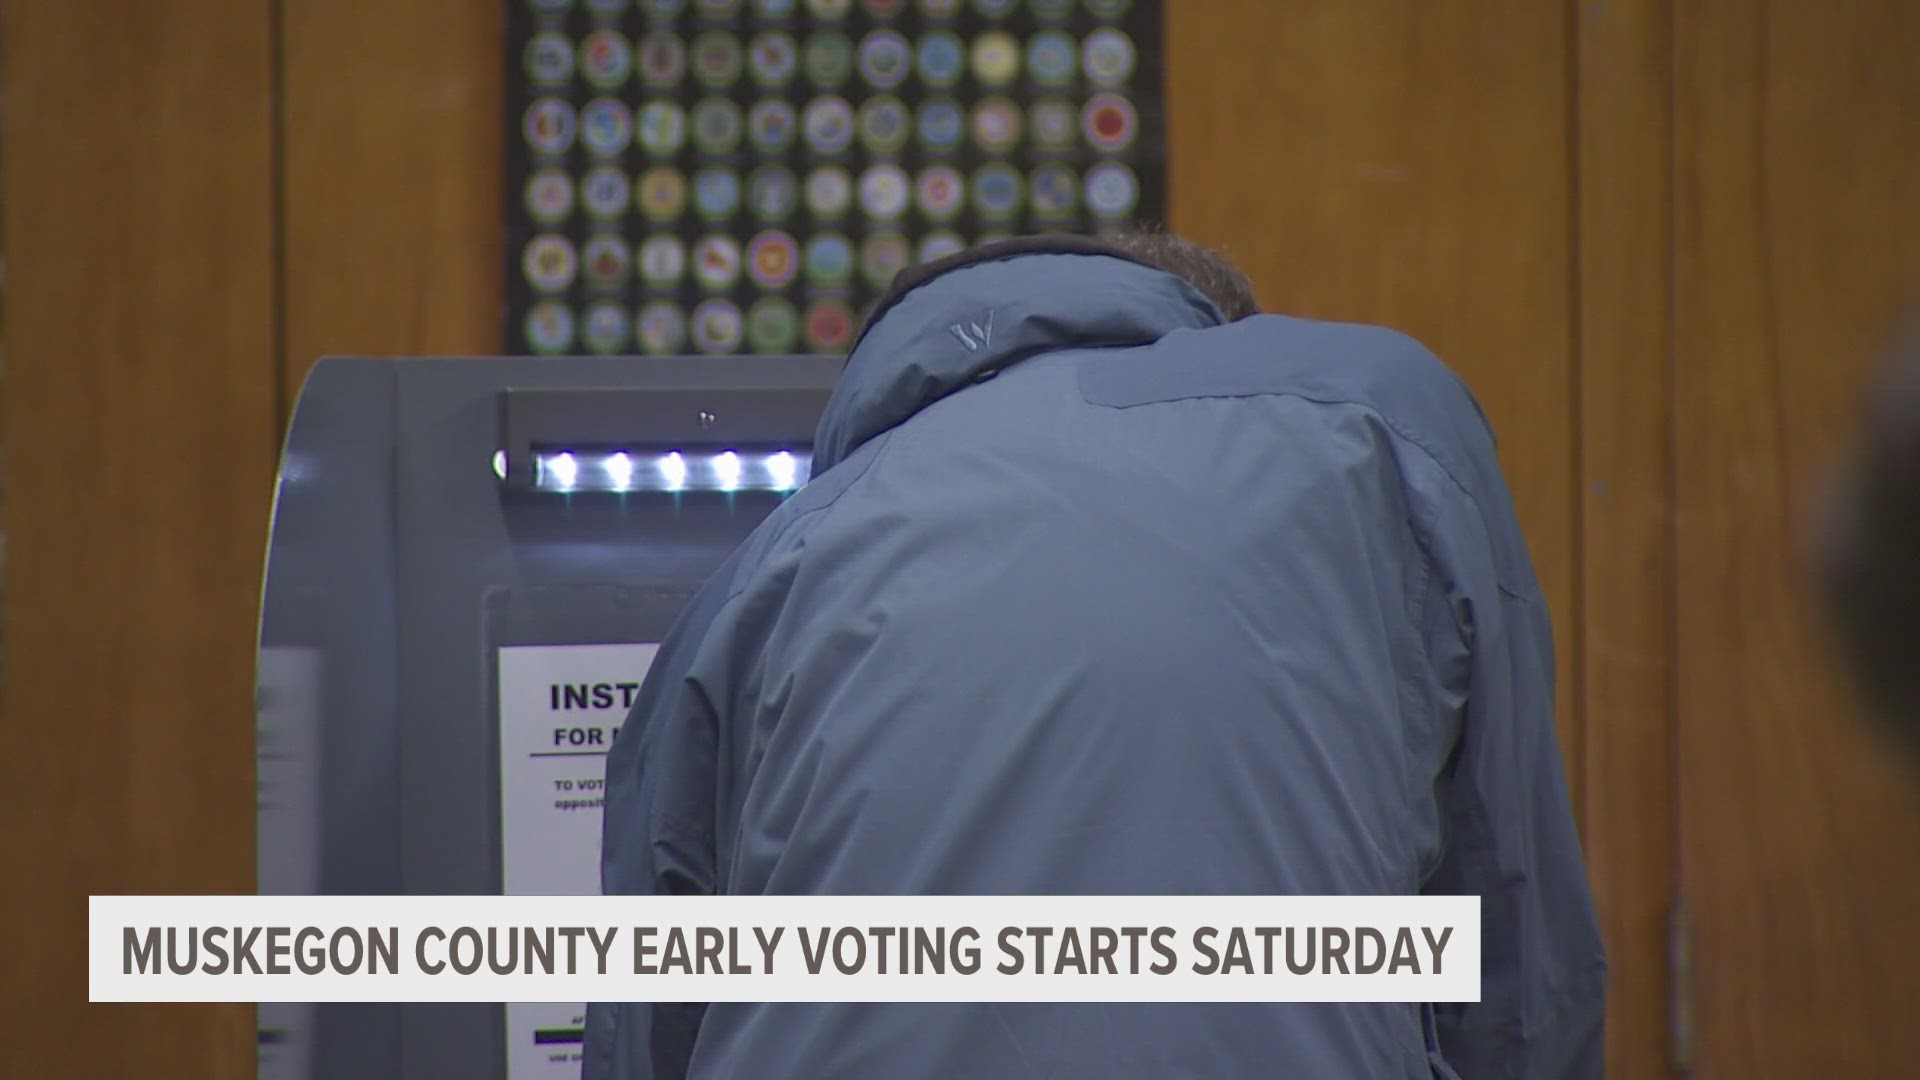 Early voting in Michigan's presidential primary election starts this Saturday for most areas in Muskegon County.